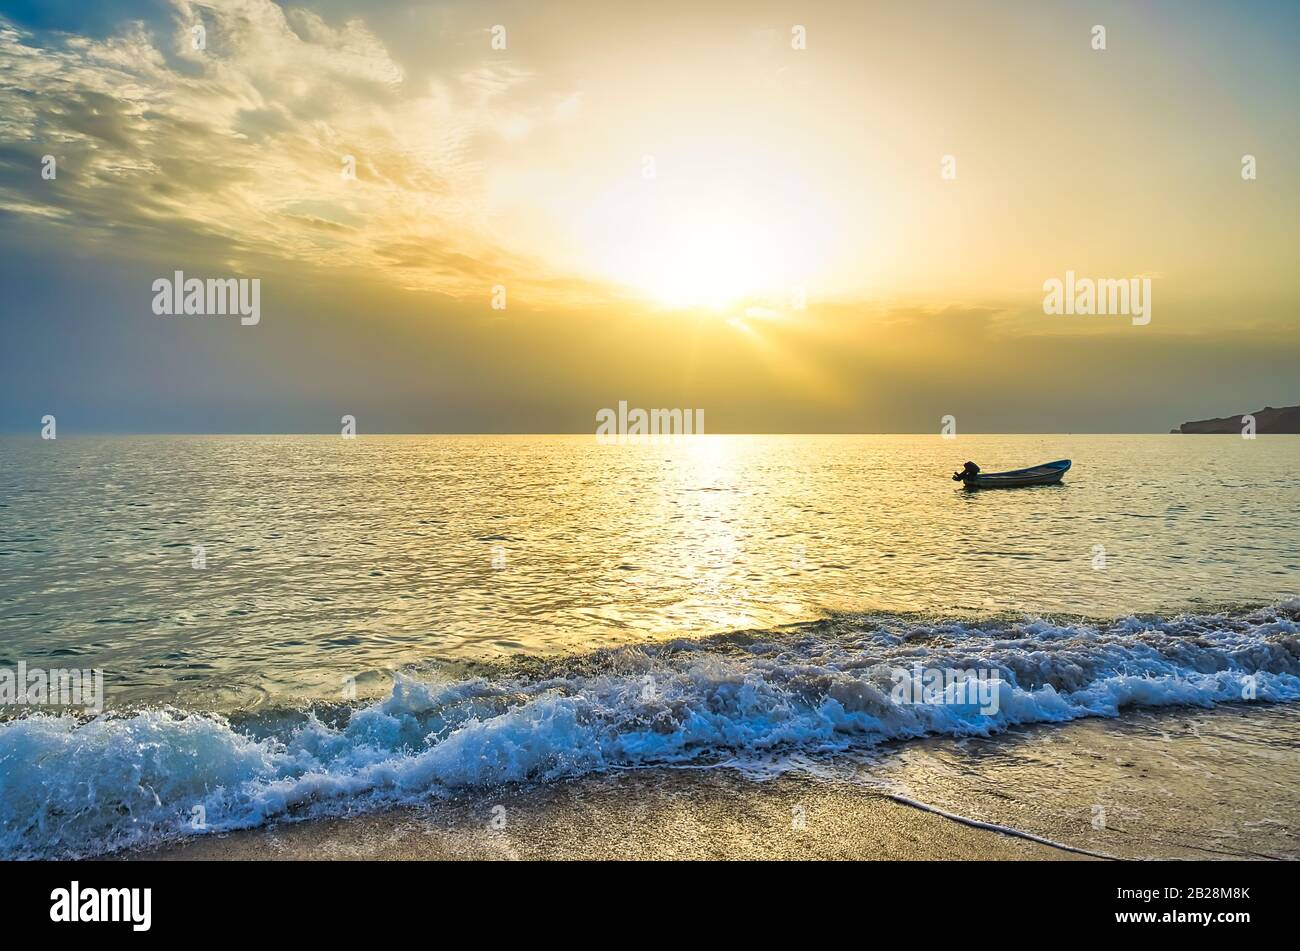 Empty fishing boat welcoming morning sunlight on the beach. Waves Splashing in the Golden Hour. From Muscat, Oman. Stock Photo